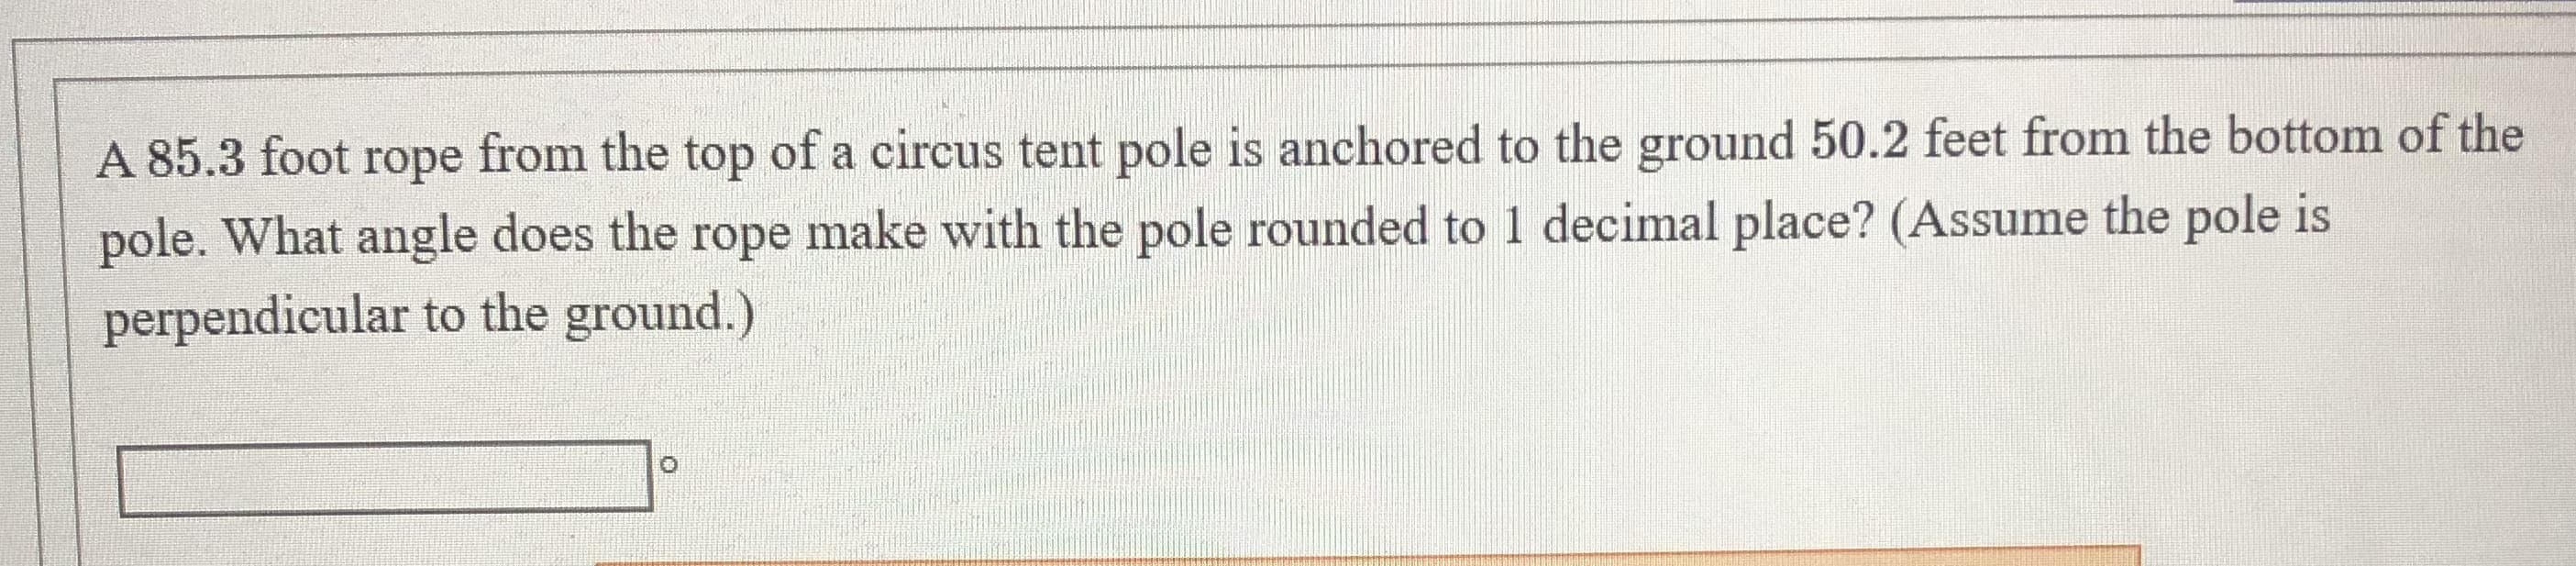 A 85.3 foot rope from the top of a circus tent pole is anchored to the ground 50.2 feet from the bottom of the
pole. What angle does the rope make with the pole rounded to 1 decimal place? (Assume the pole is
perpendicular to the ground.)
